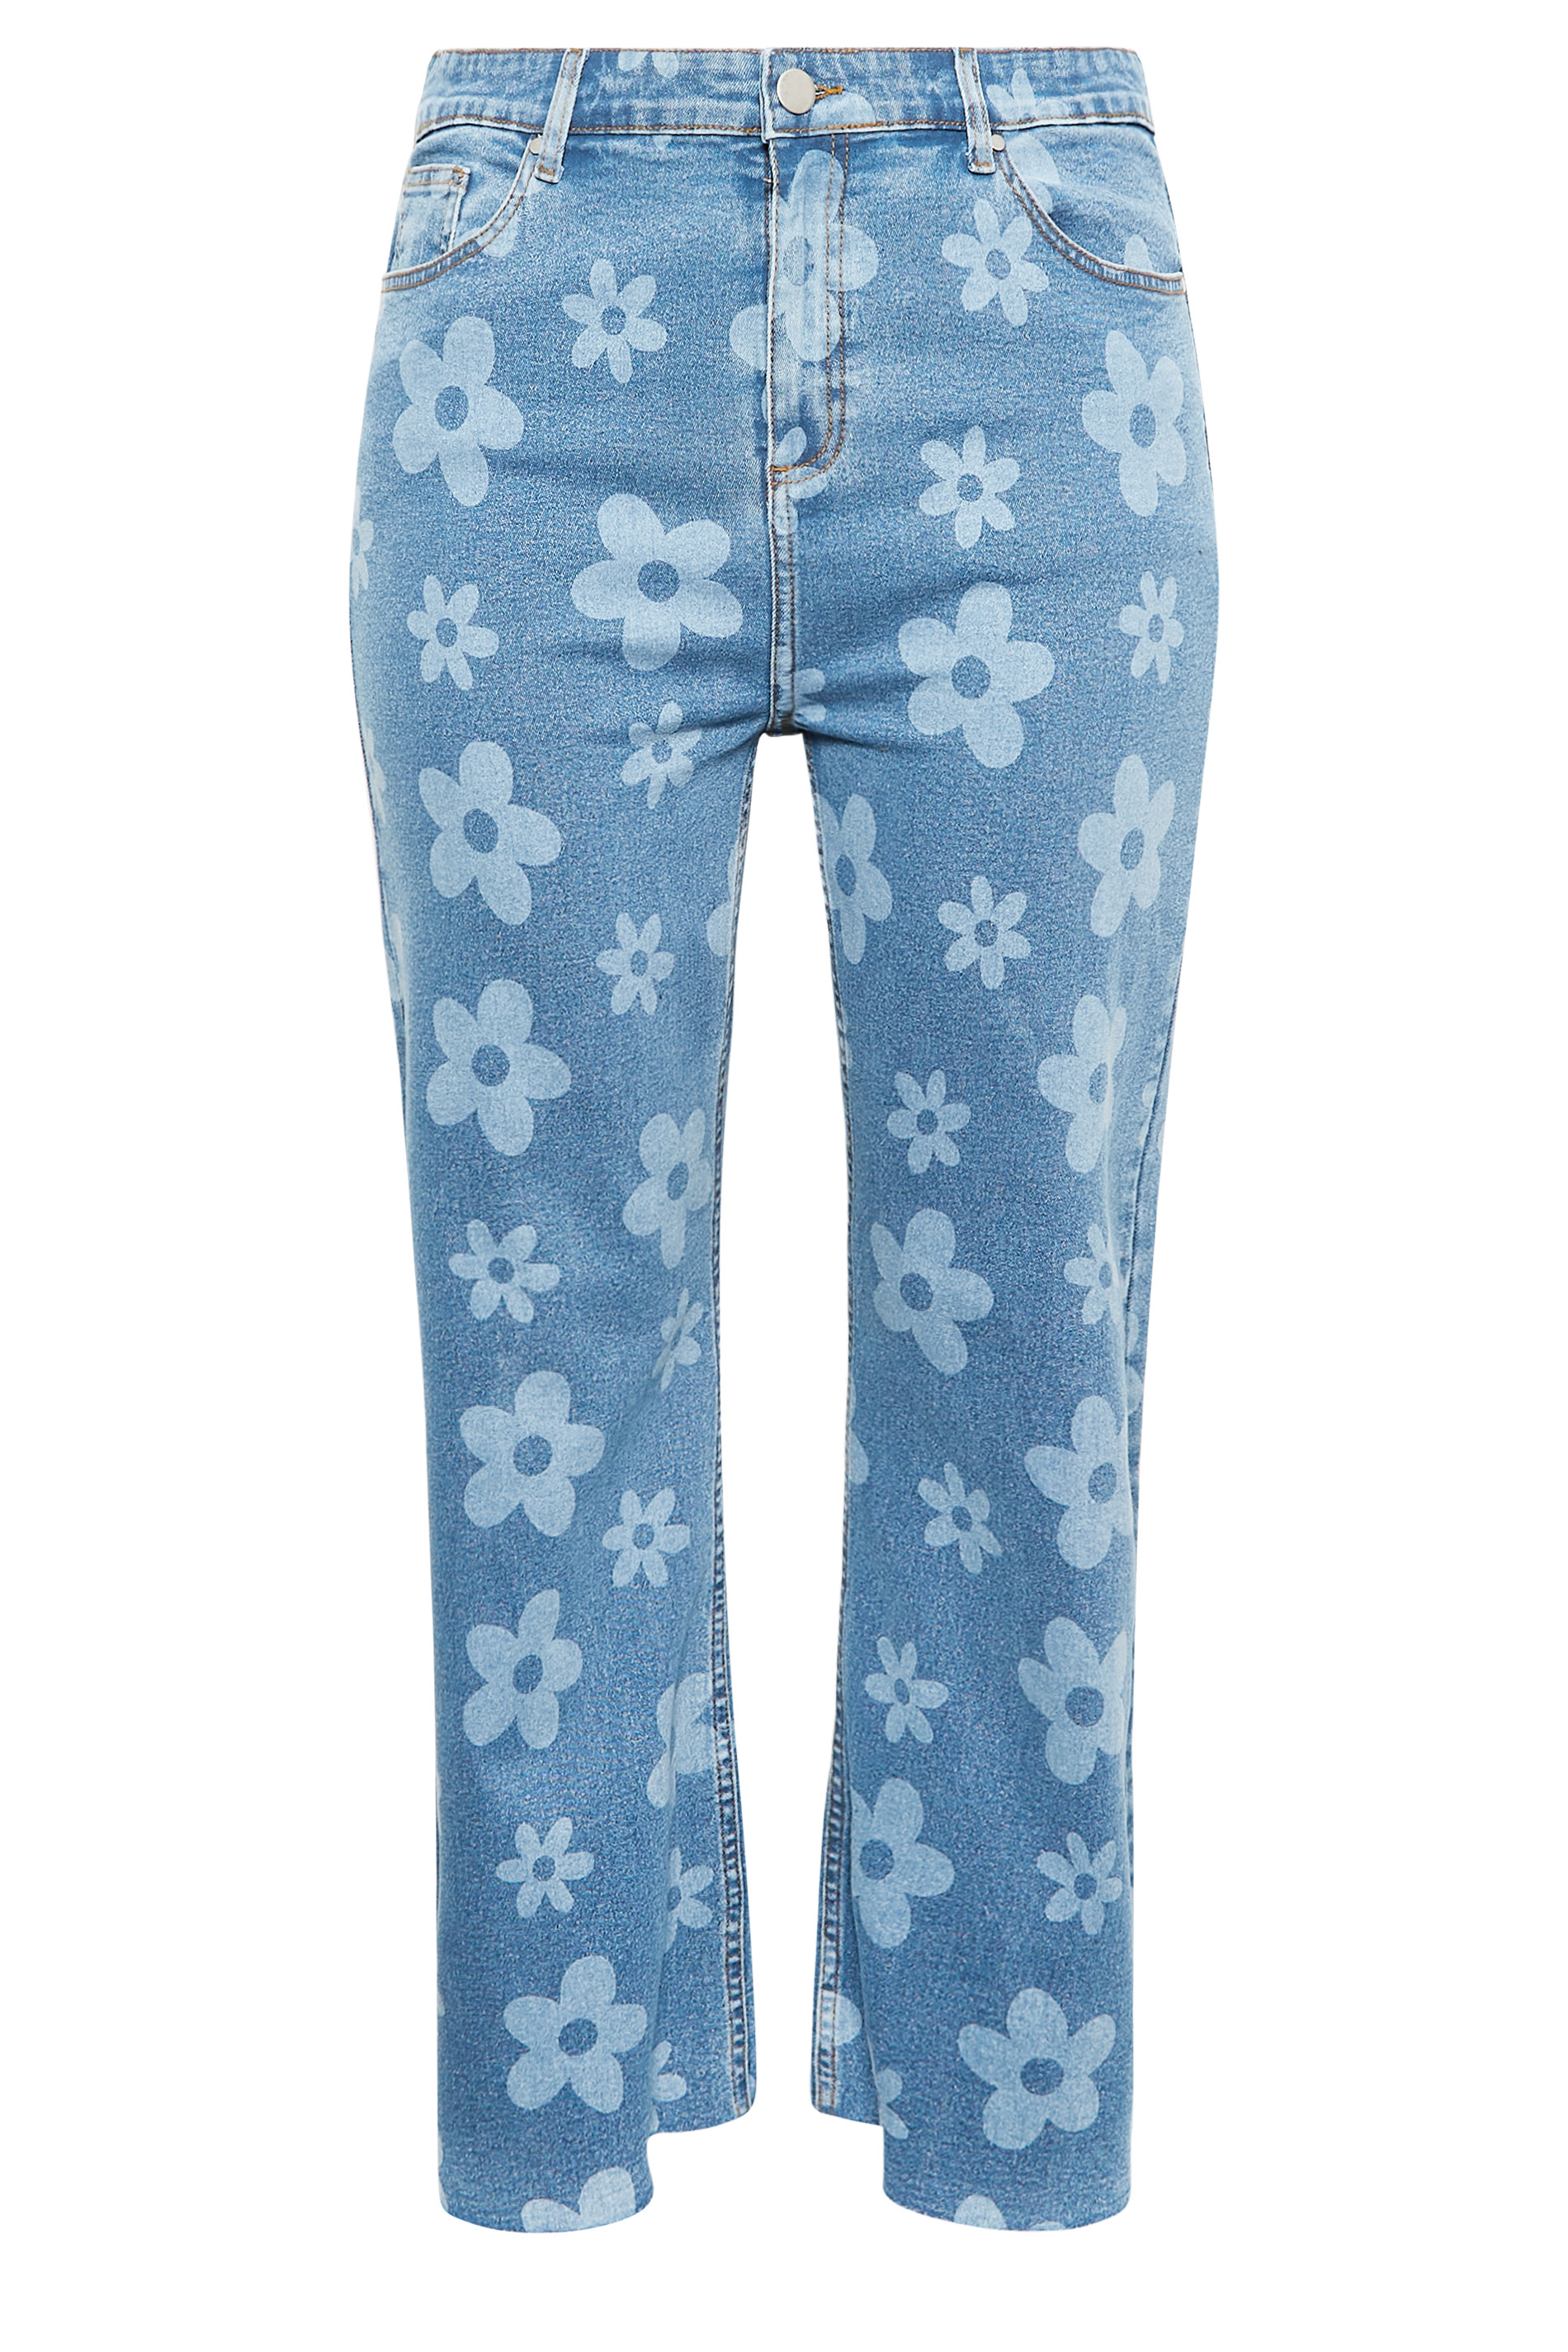 MOTHER The Rambler Zip Ankle Floral Jeans  Neiman Marcus